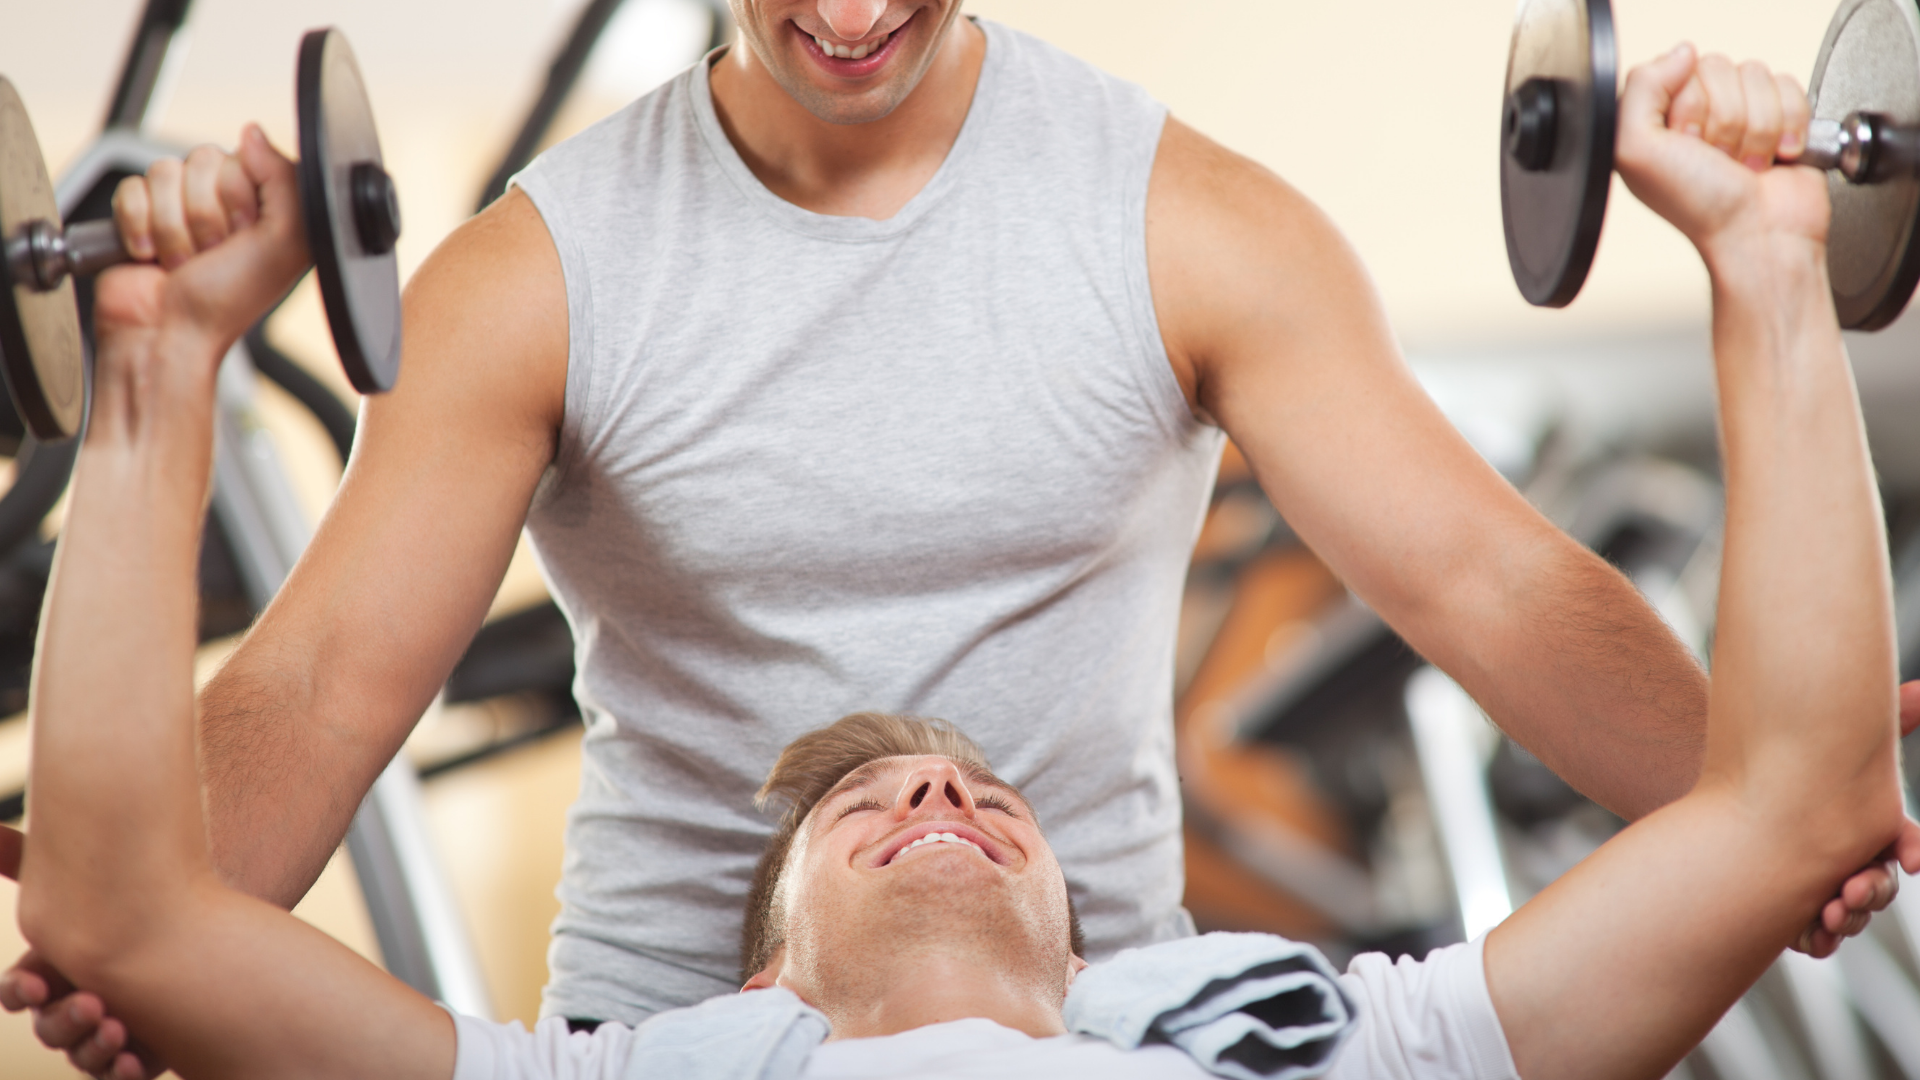 Should You Get Your Personal Trainer A Gift for Christmas